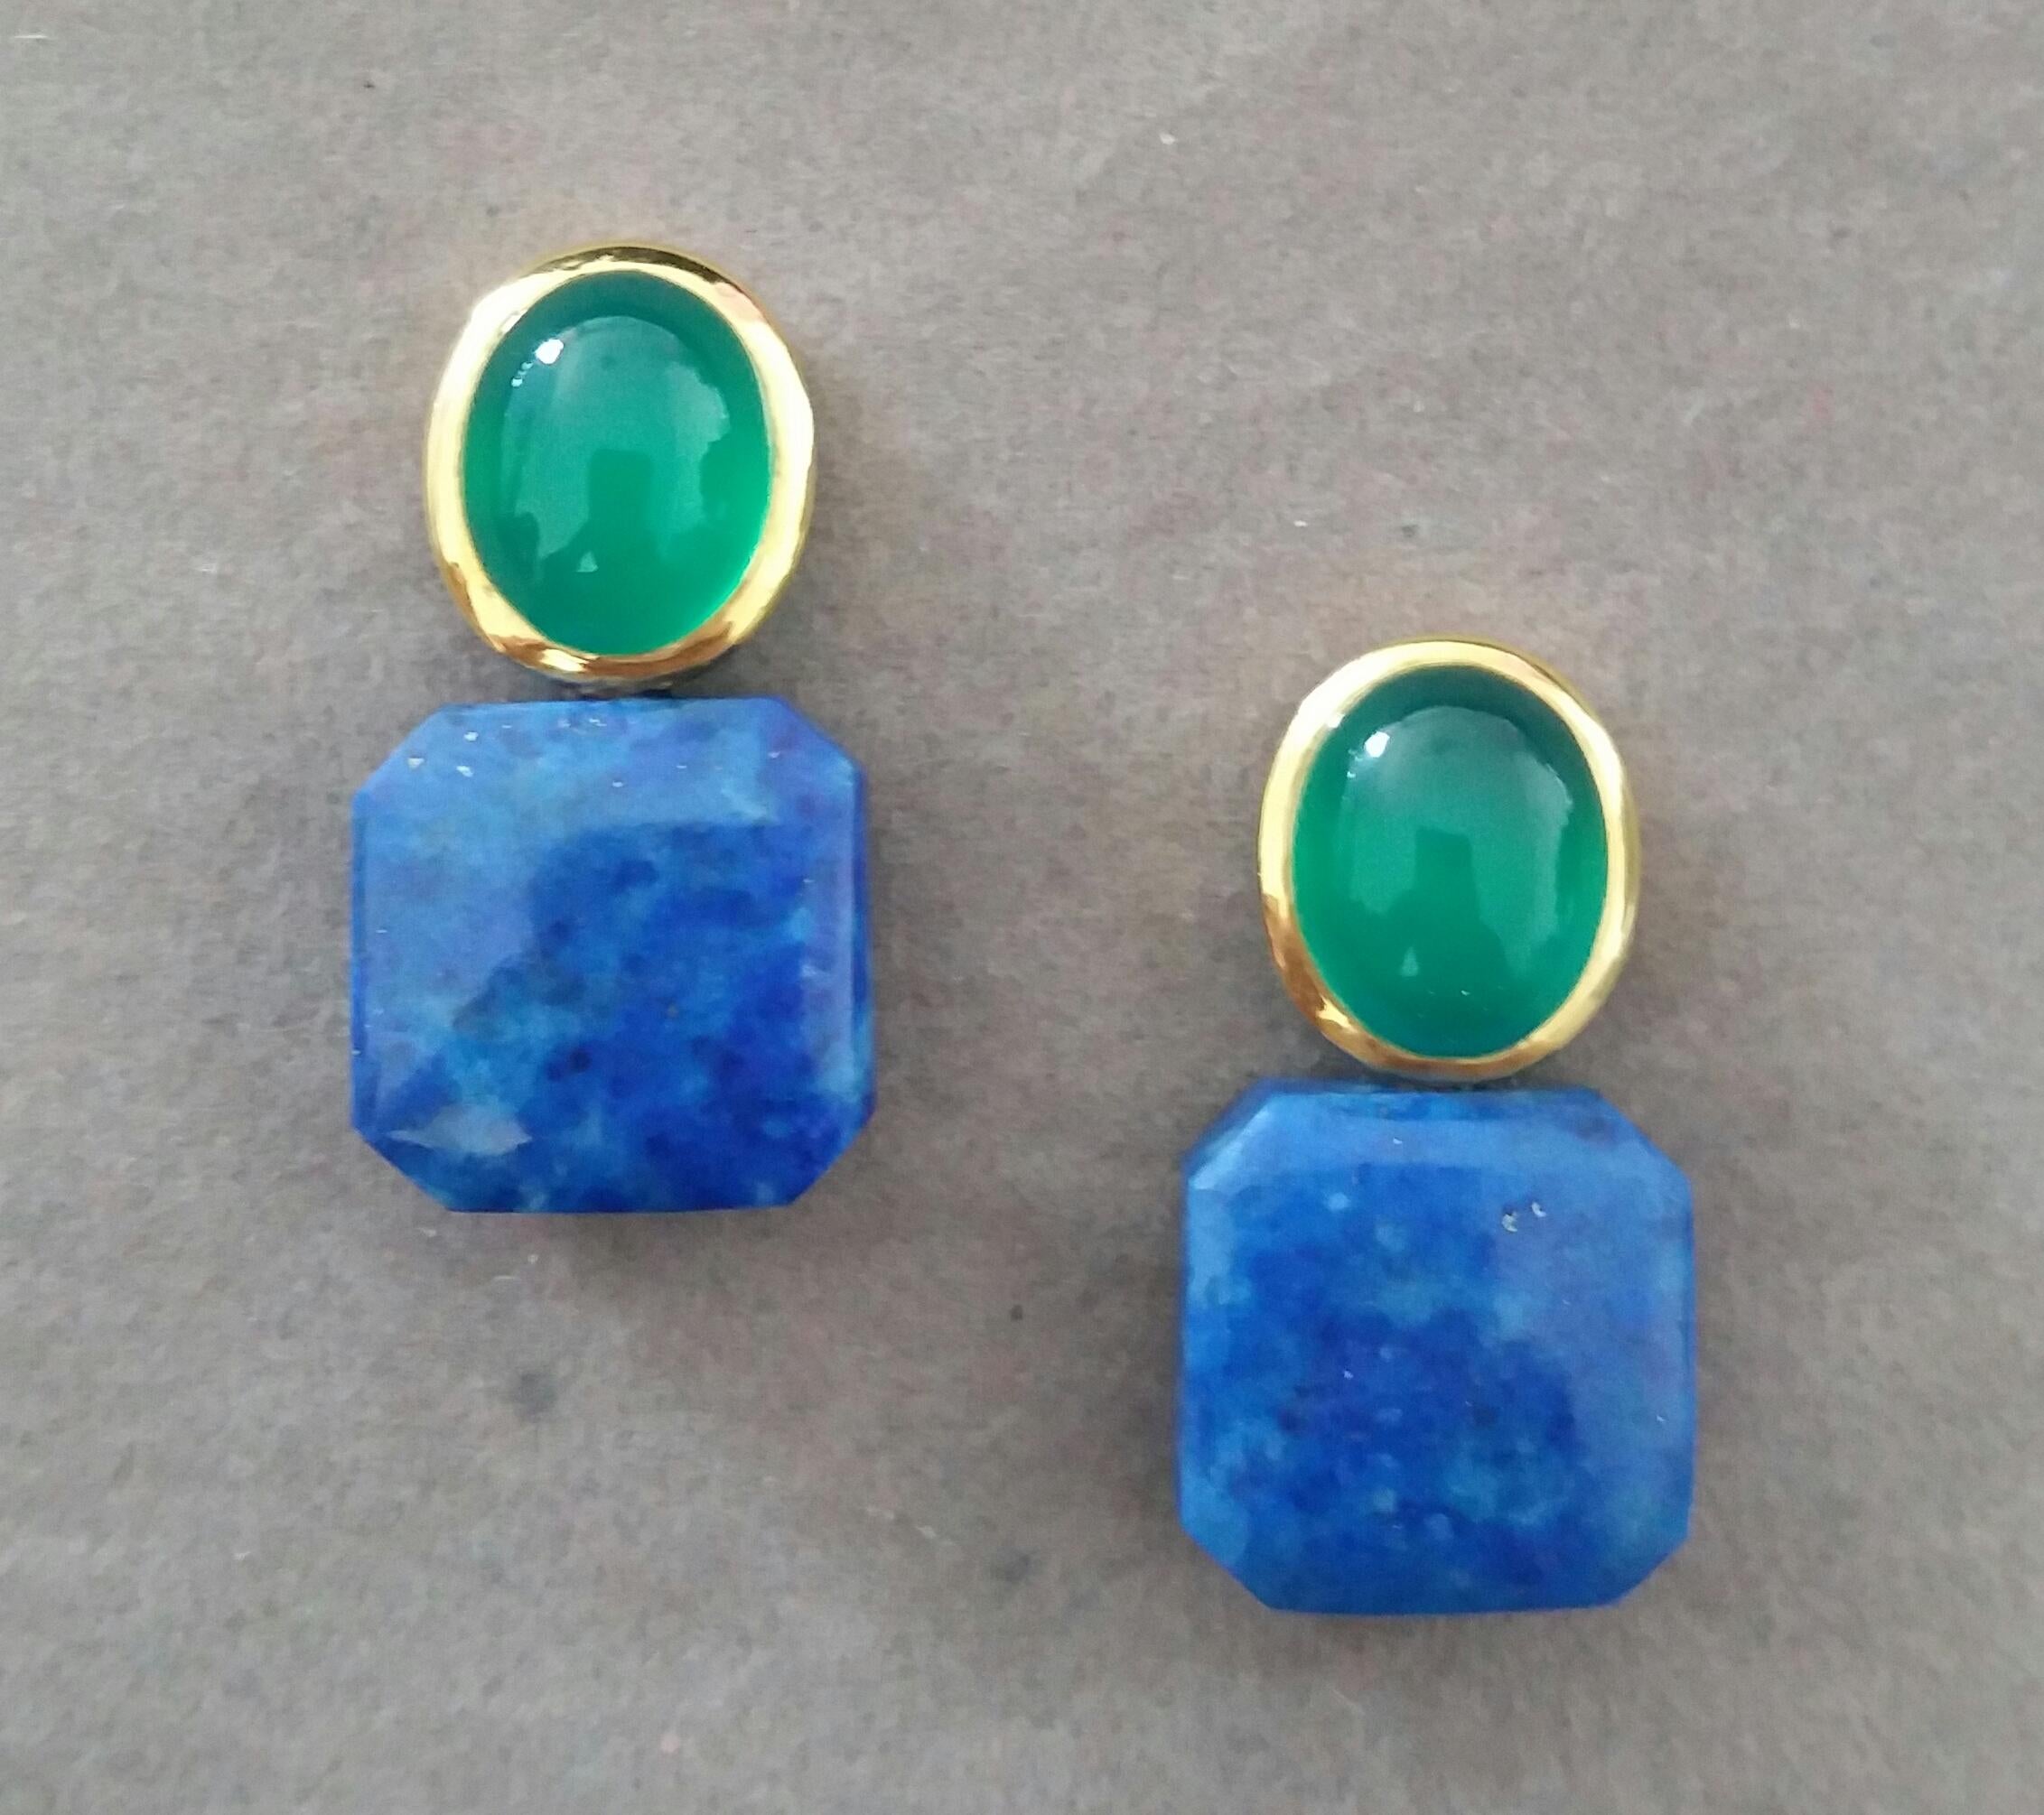 Elegant and completely handmade Earrings consisting of  upper parts of 2 oval shape Green Onyx Cabs measuring 9x11 mm set in a 14 Kt yellow gold bezel , in the lower part we have 2 Flat Plain Octagon Shape Natural Color Lapis Lazuli measuring 14x14 